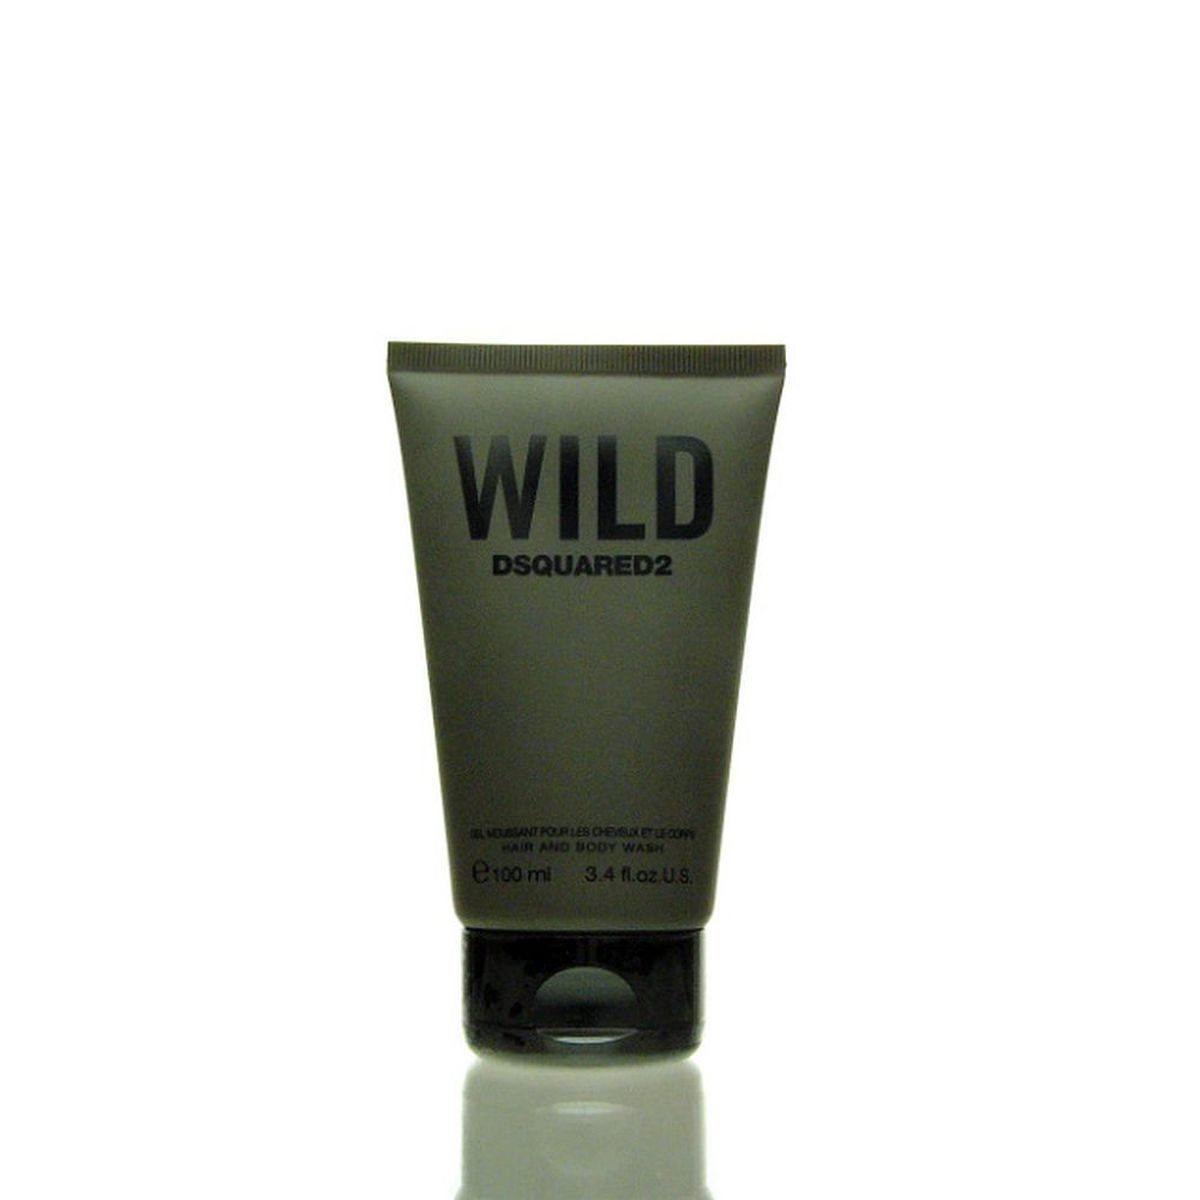 Dsquared² 100 Dsquared2 Wash Wild and Duschpflege Body ml Hair